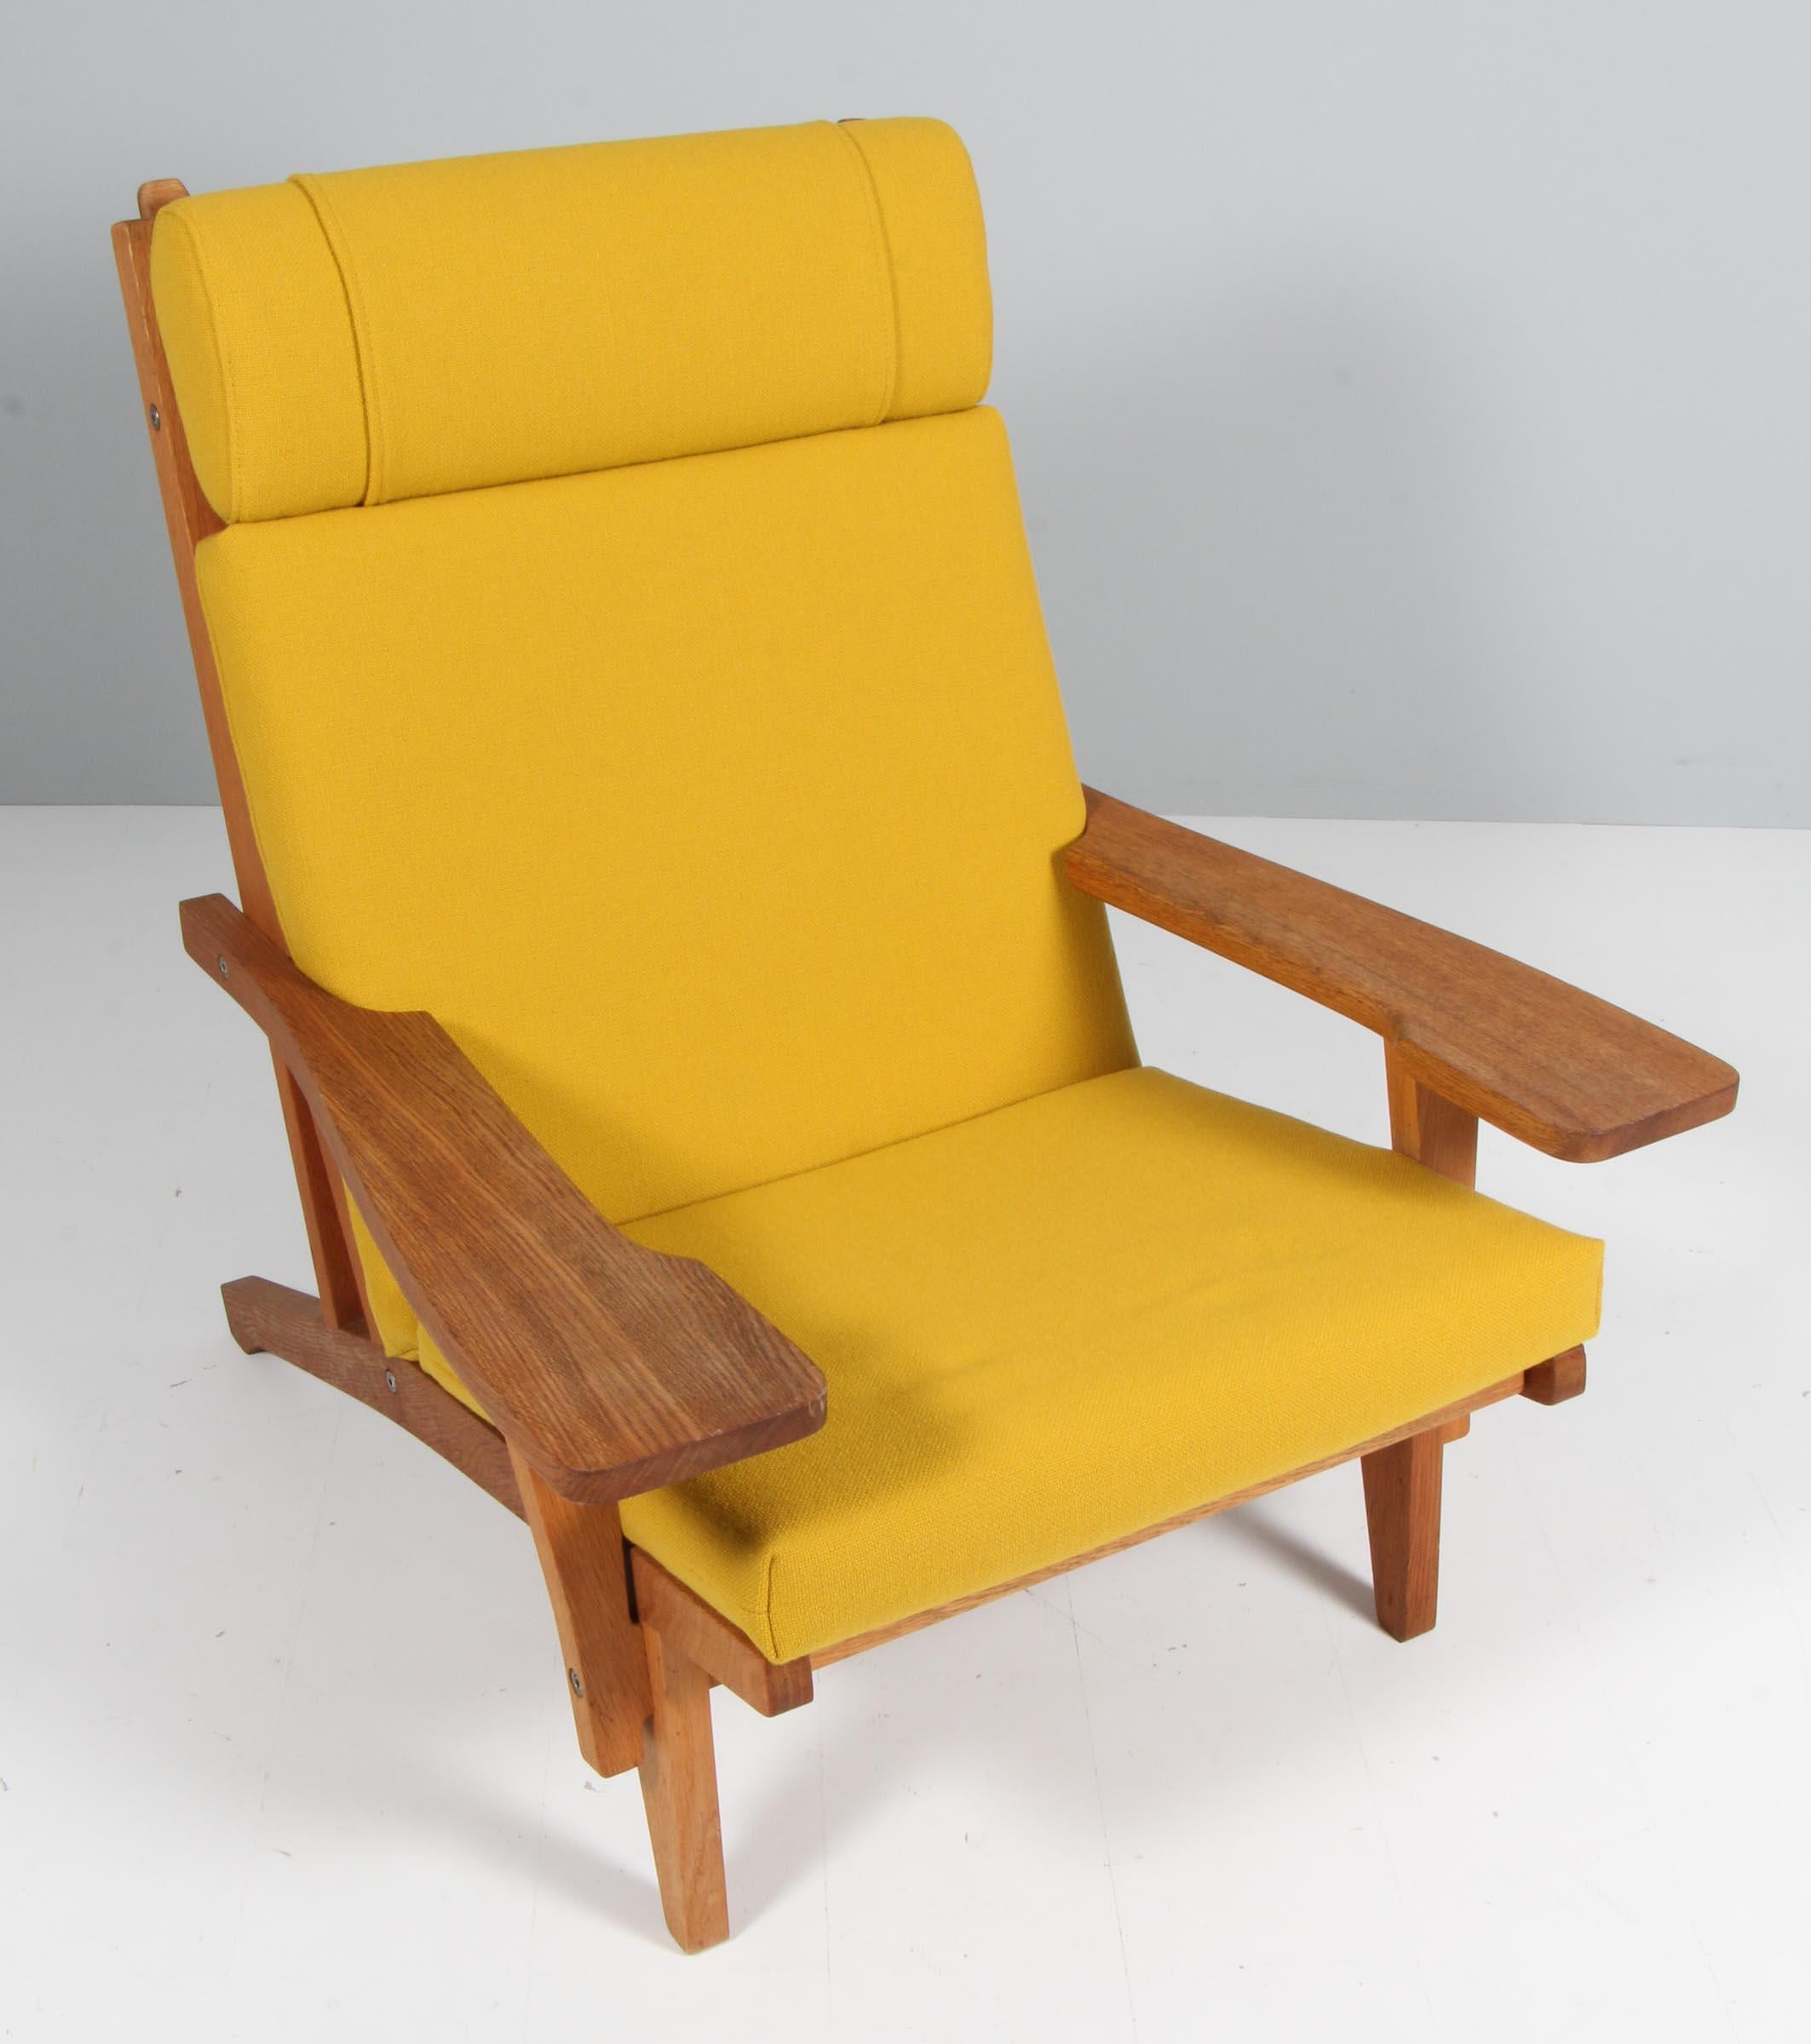 Hans J. Wegner lounge chair with loose cushions new upholstered with yellow Hallingdal wool from Kvadrat.

Frame of oak. With armrests.

Model GE-375, made by GETAMA.